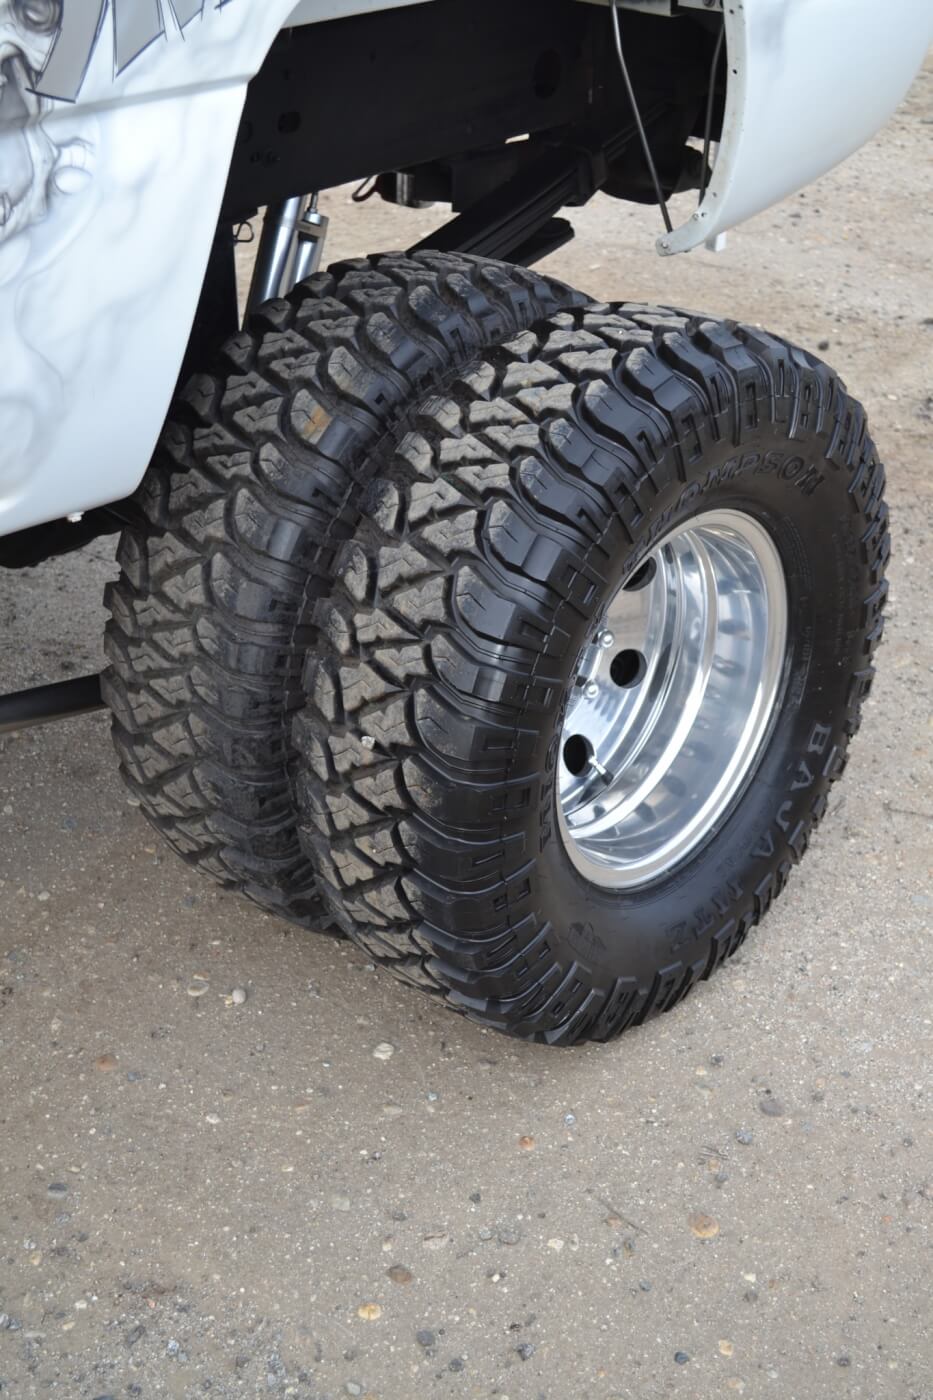 Dual rear wheels are the setup of choice for today's serious pullers, and John's no exception. Weld Racing wheels are again found on the rear of the truck, along with the Baja MTZ tires.